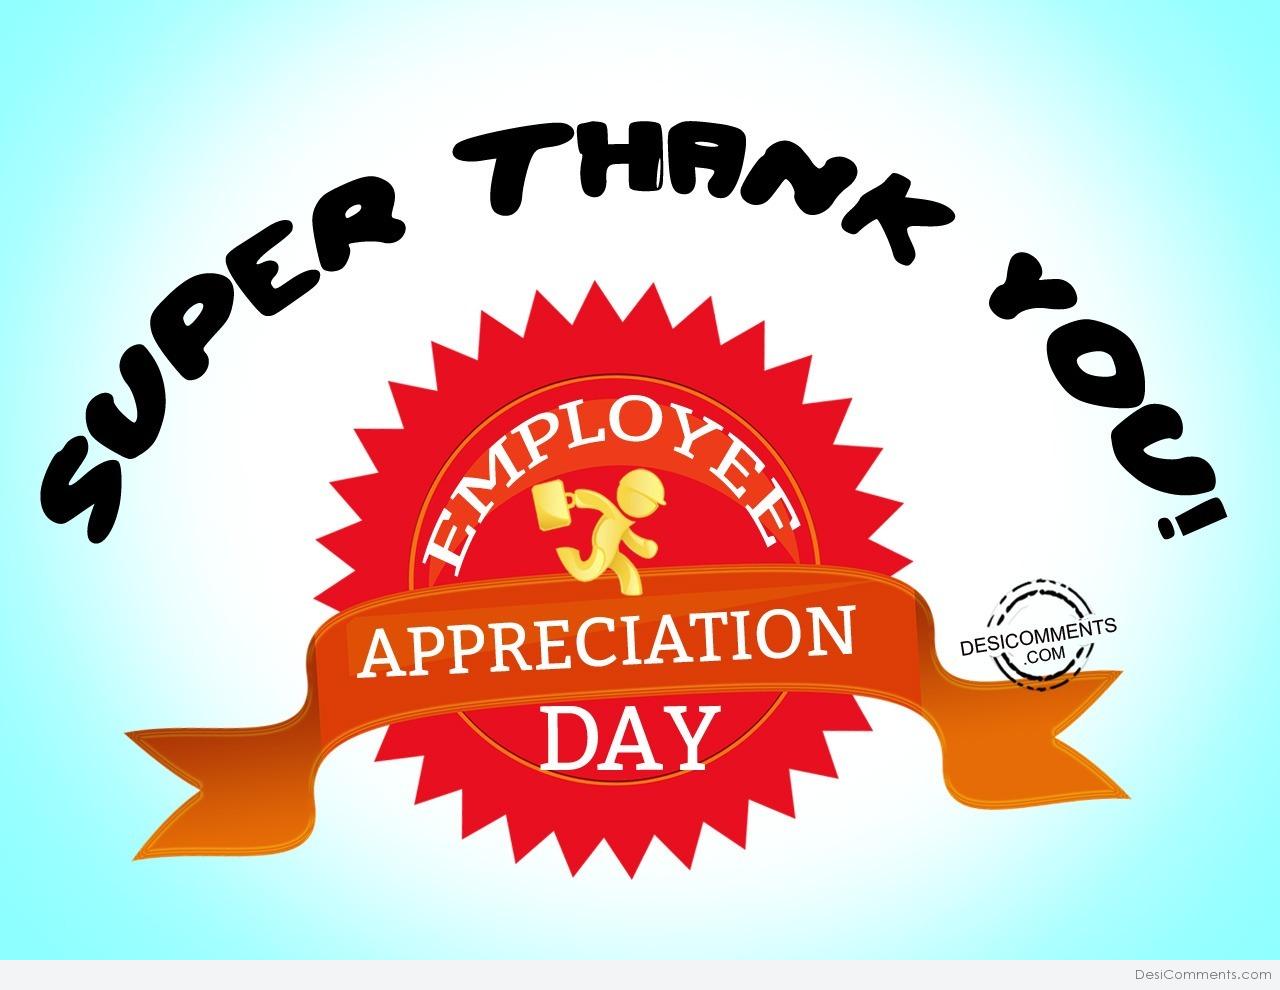 Employee Appreciation Day Pictures, Images, Graphics for Facebook